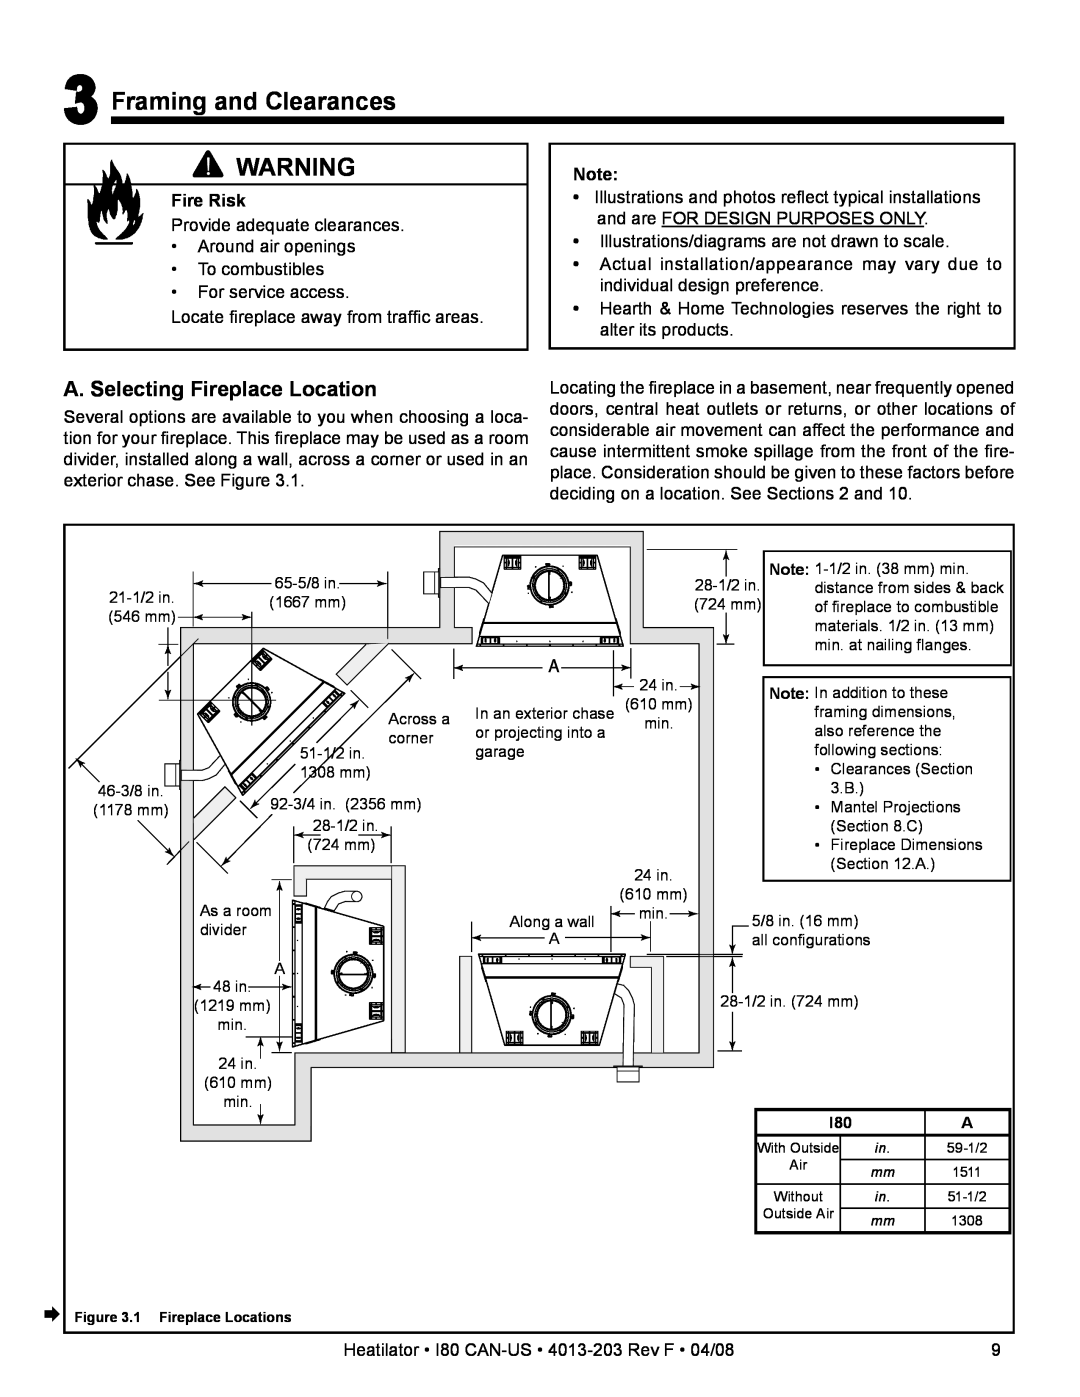 Heatiator I80 owner manual Framing and Clearances, A. Selecting Fireplace Location, Fire Risk 